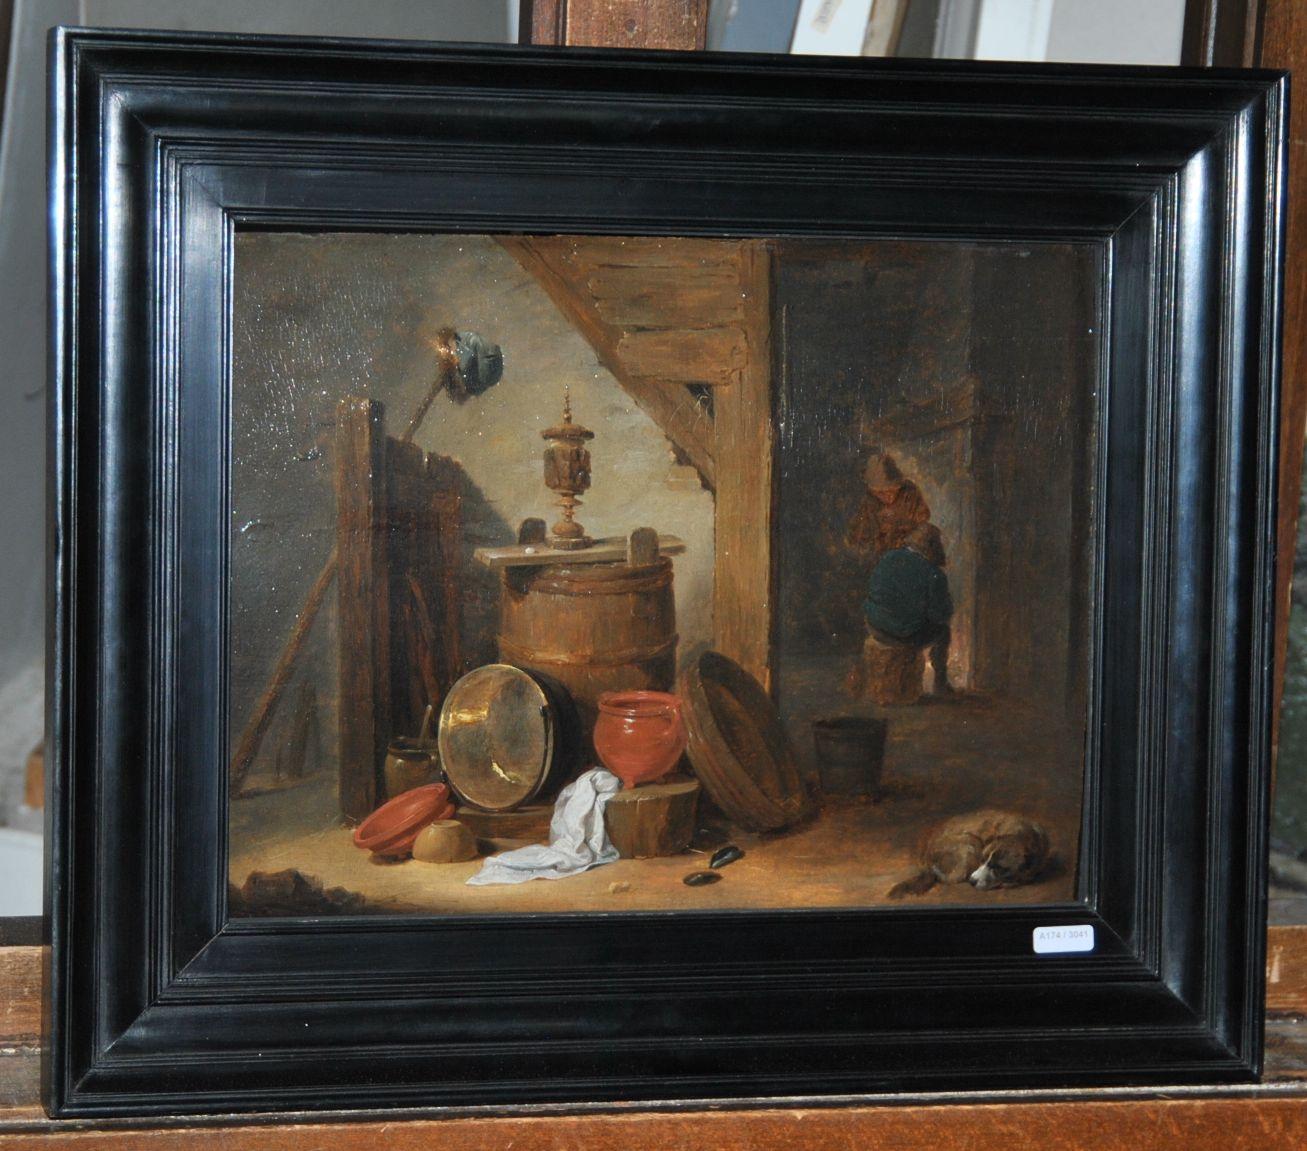 A tavern interior with a dog and kitchen utensils in the foreground - Painting by David Teniers the Younger